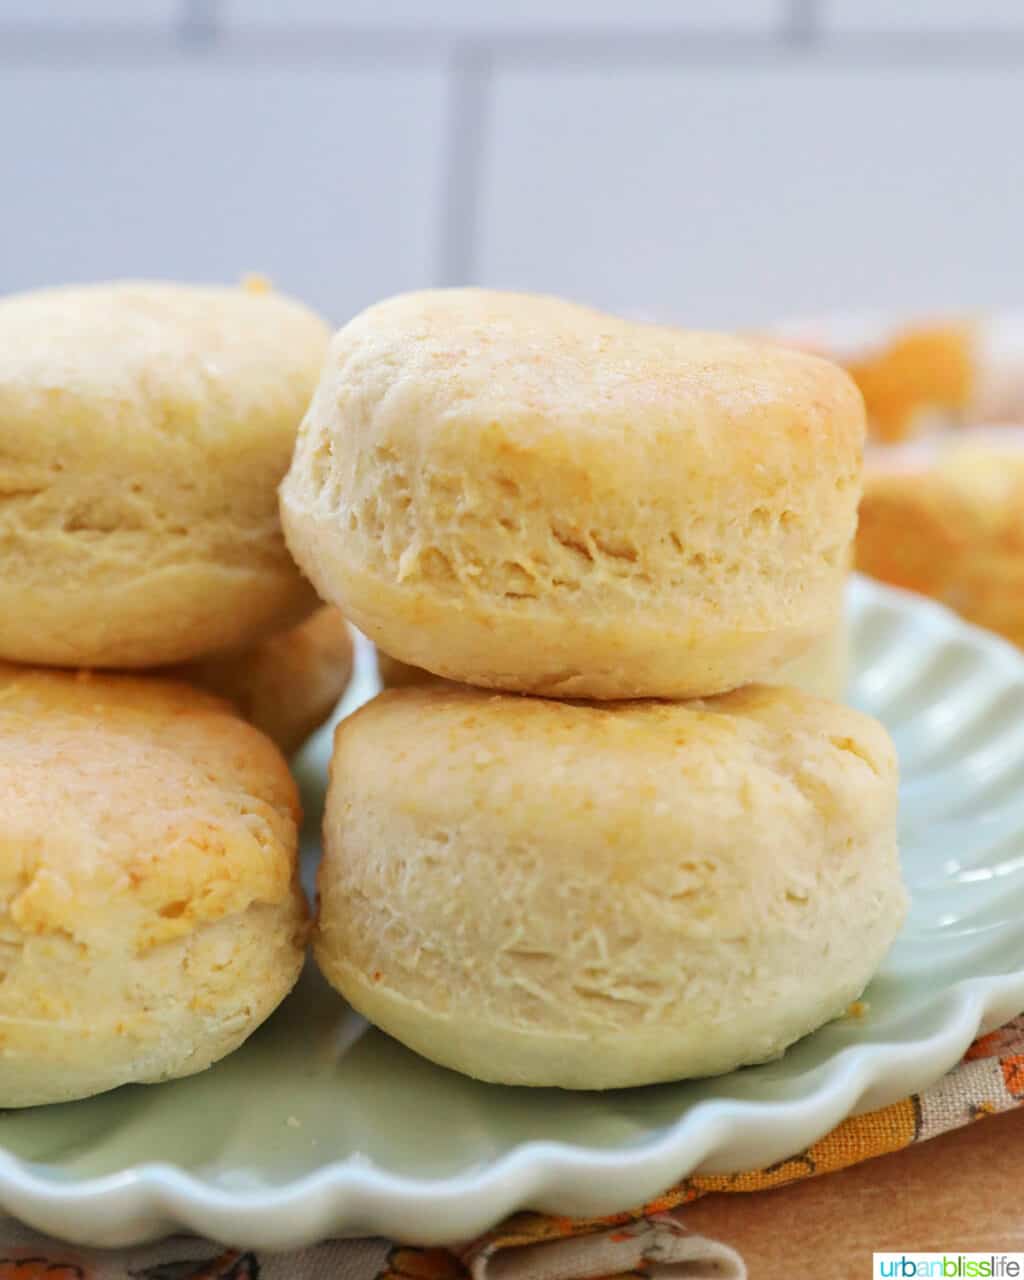 air fryer biscuits stacked on a plate.